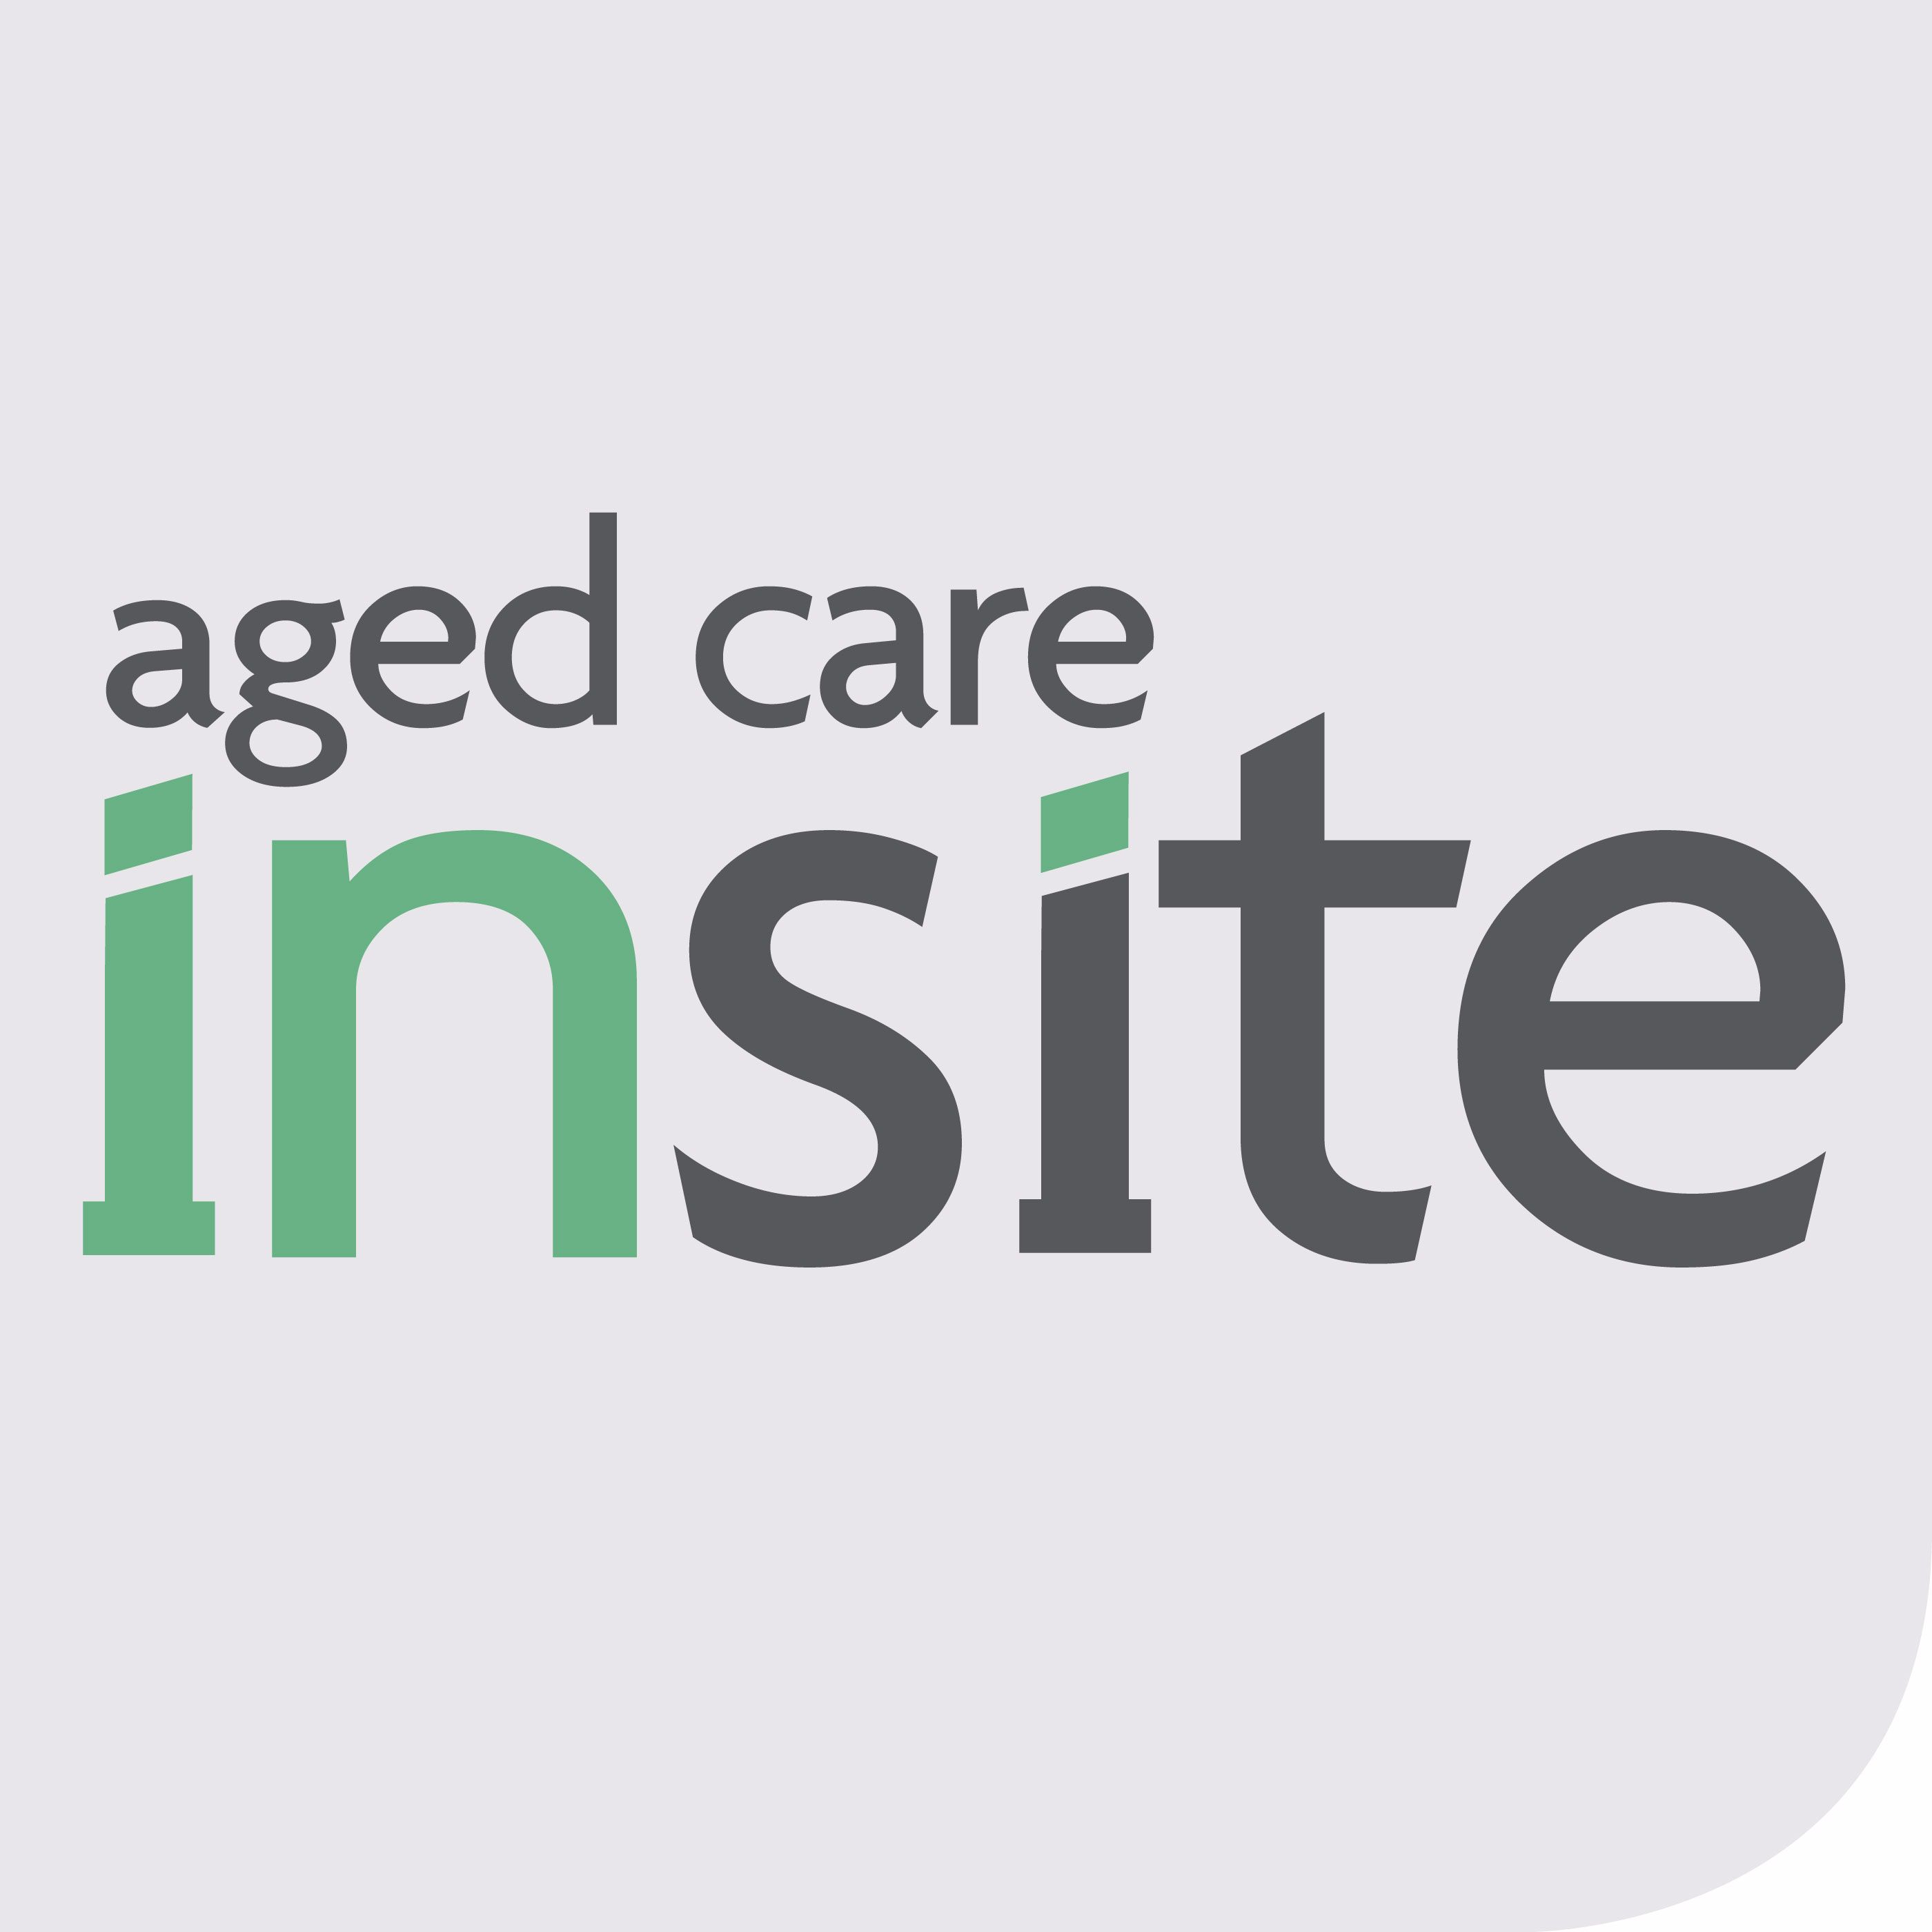 A momentous day for aged care: the new peak body ACCPA || Sean Rooney